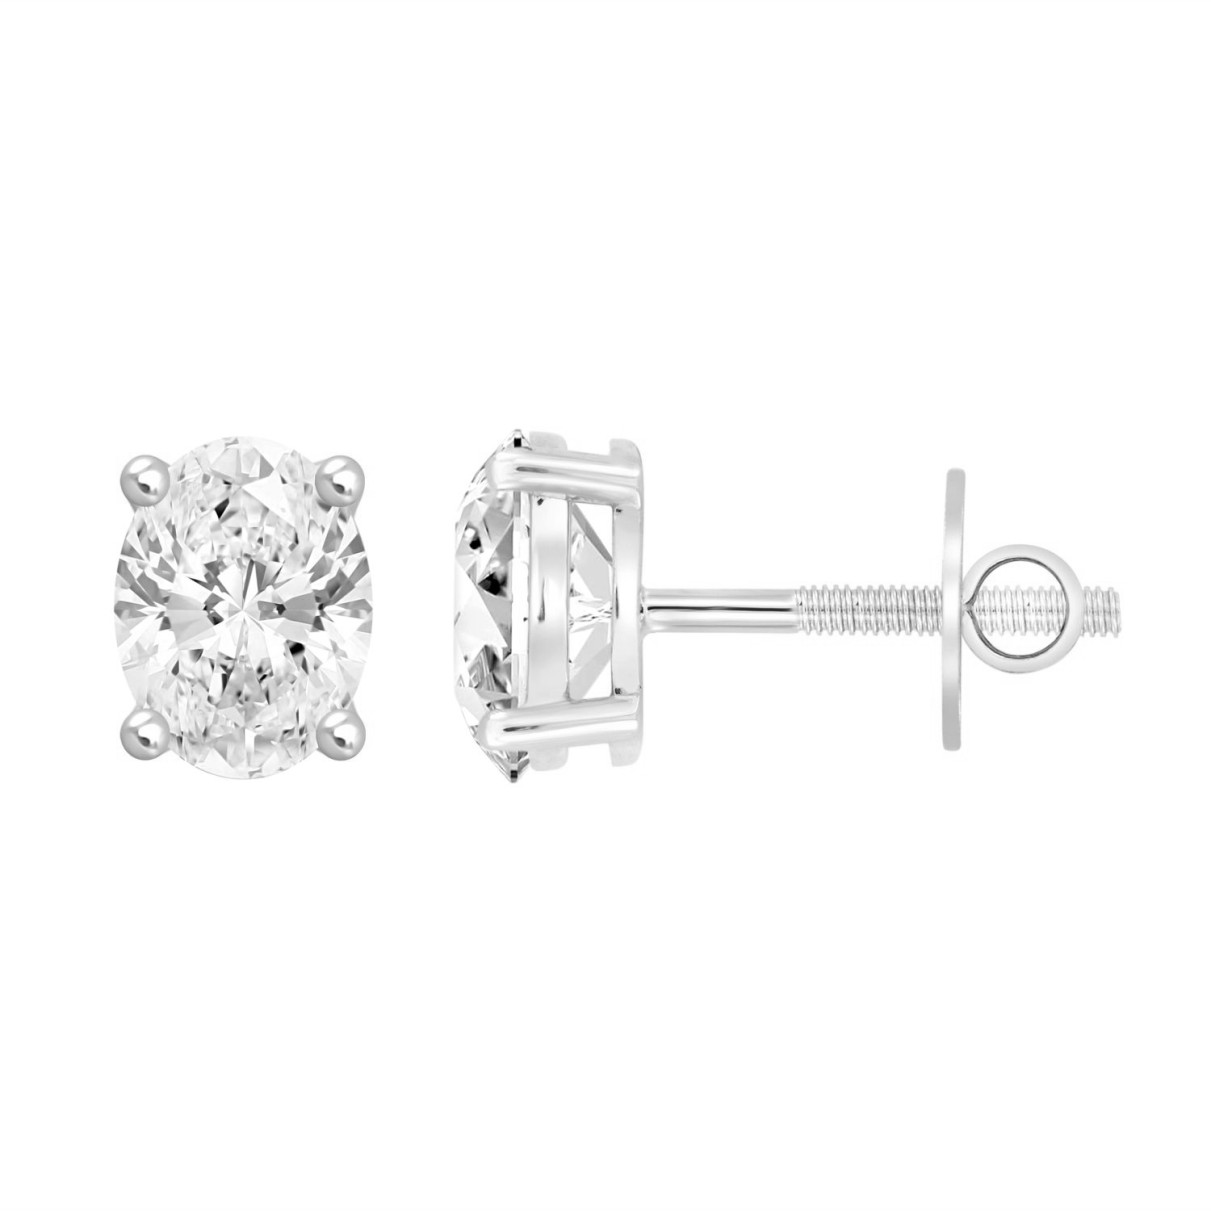 LADIES SOLITAIRE EARRINGS  2CT OVAL DIAMOND 14K WHITE GOLD